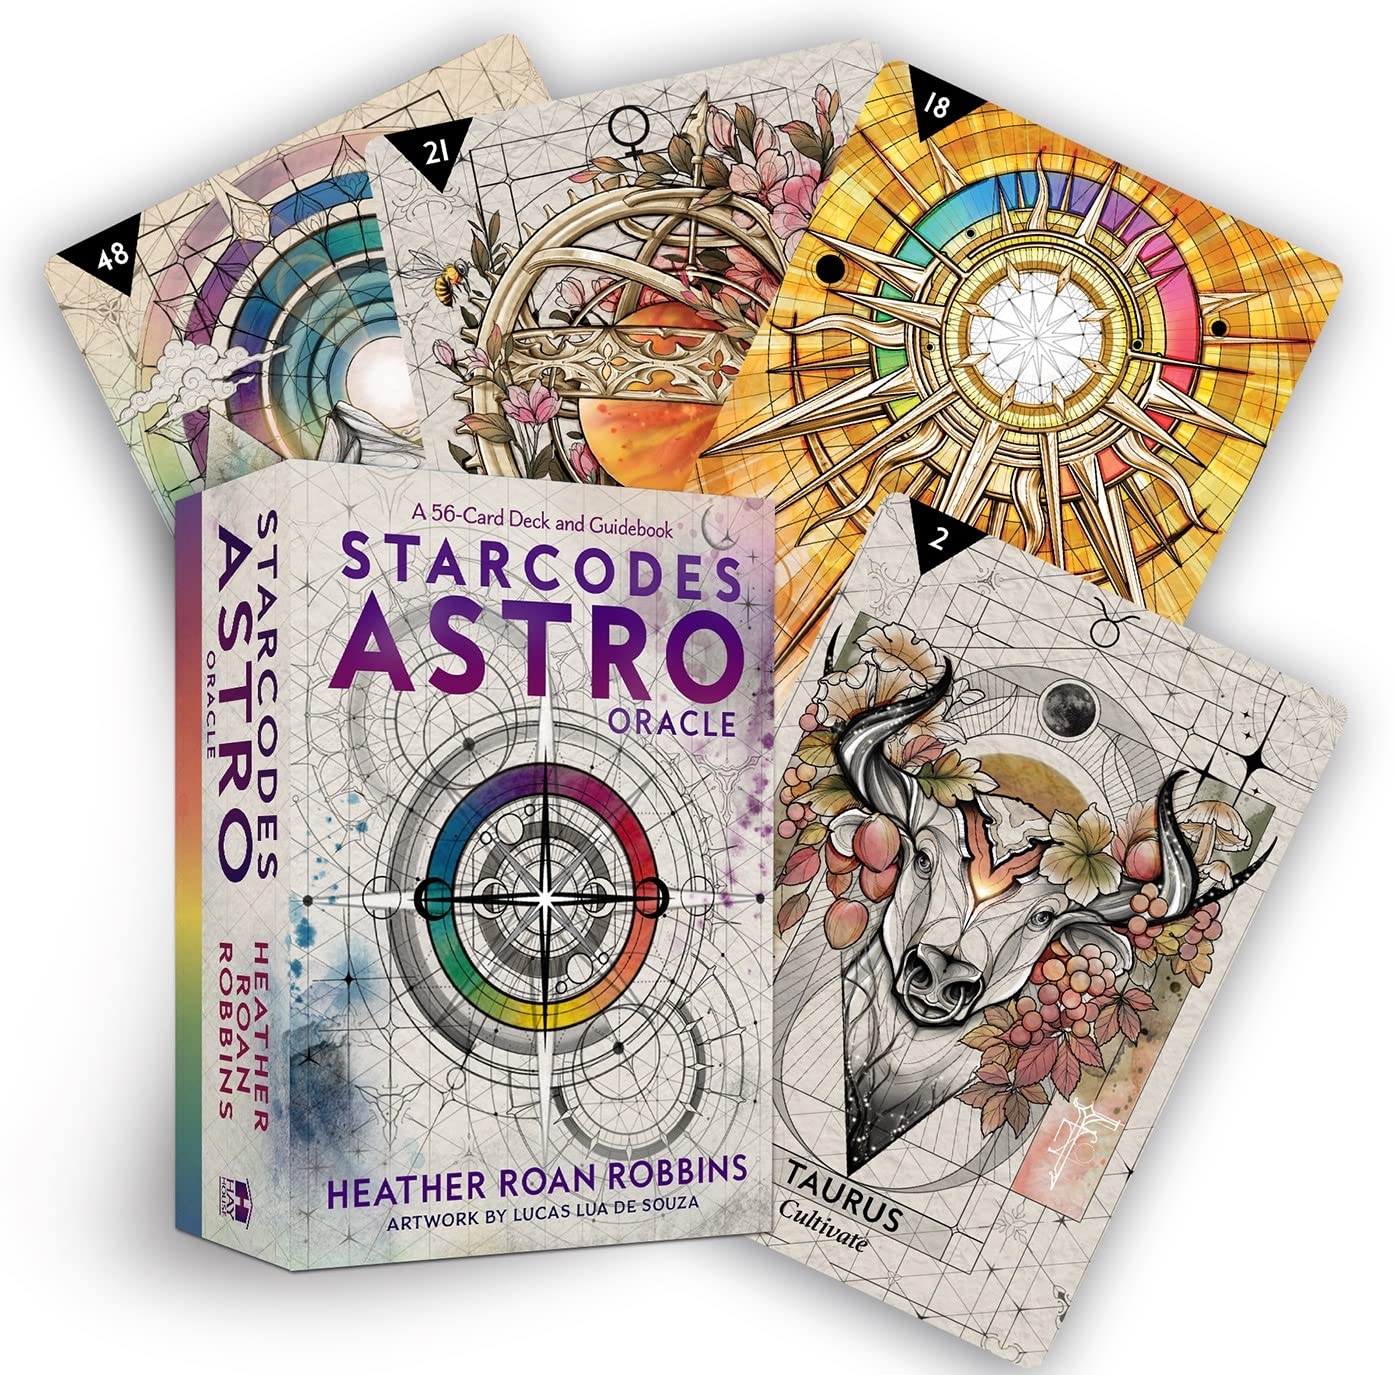 Starcodes Astro Oracle: A 56-Card Deck and Guidebook | Heather Roan Robbins